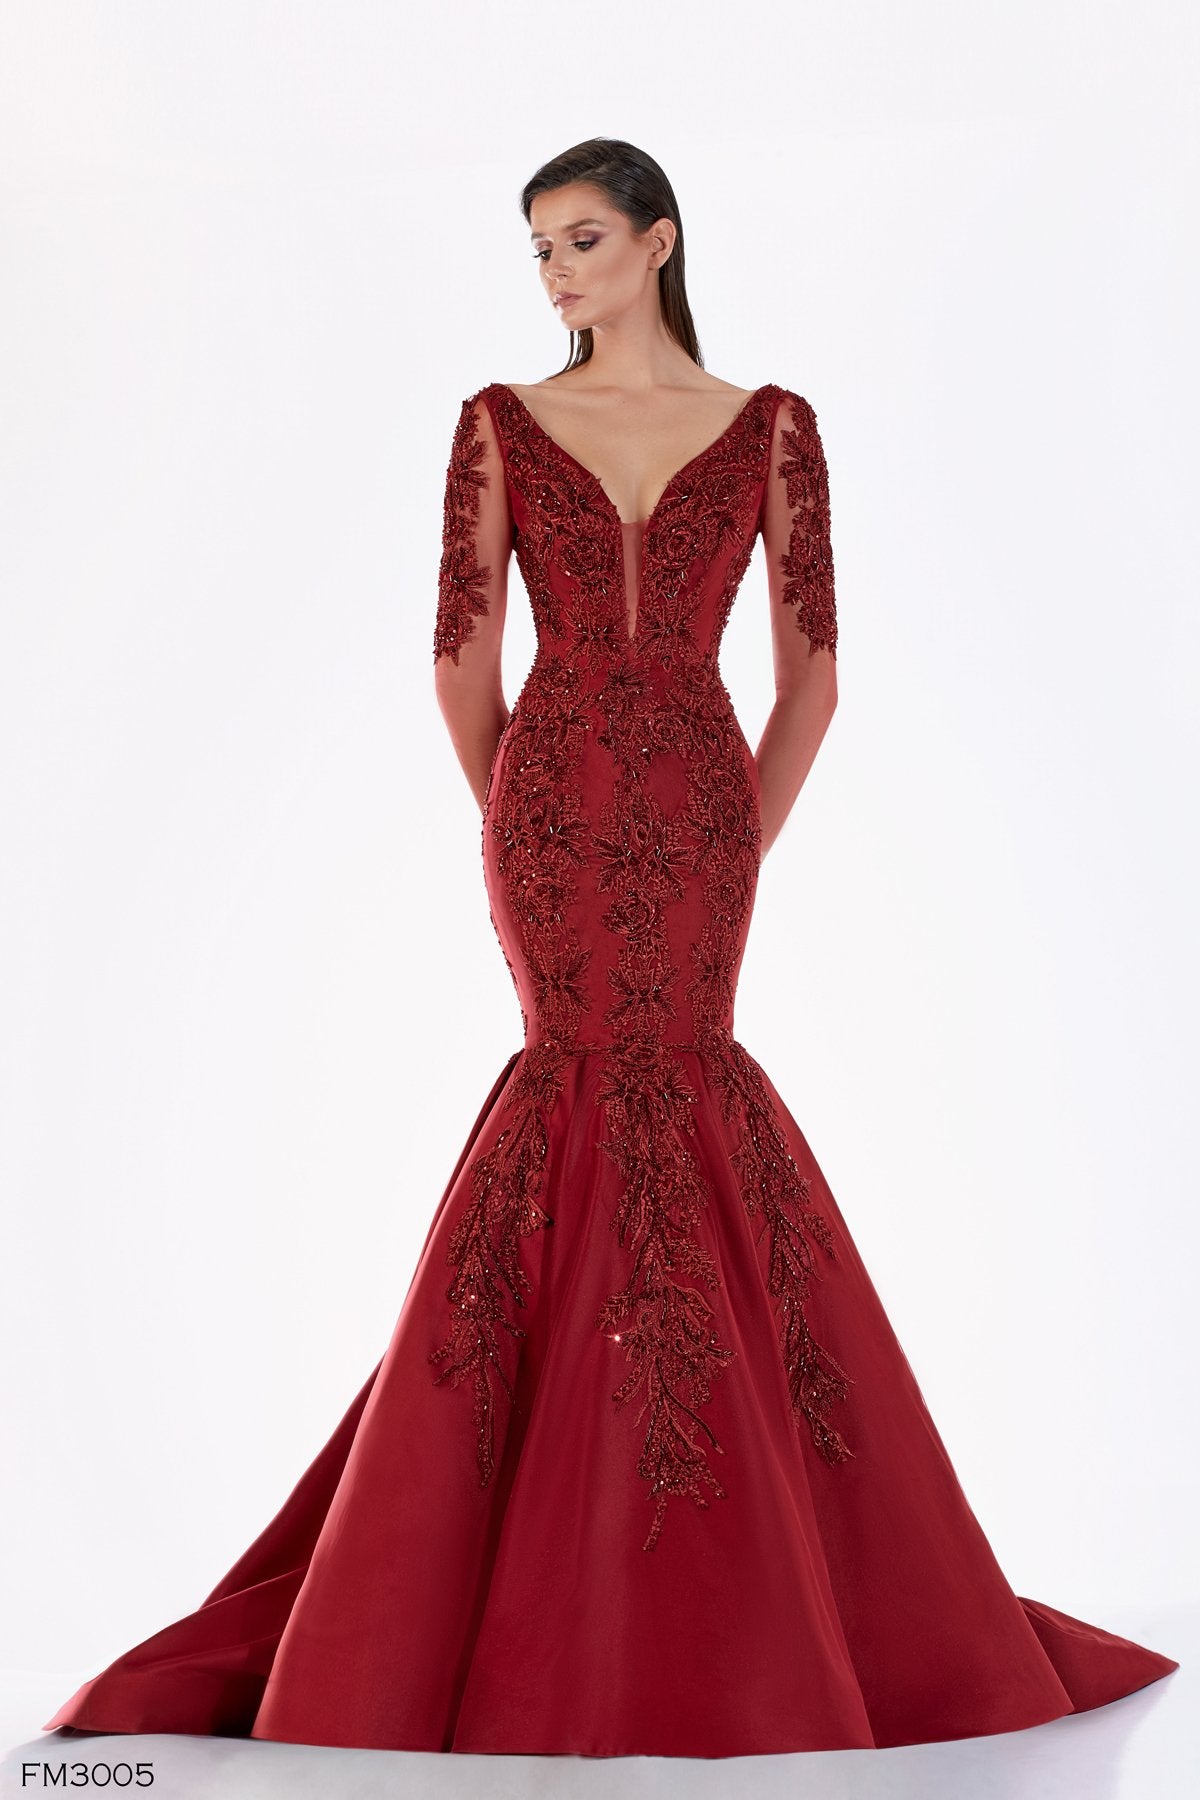 Azzure Couture FM3005 Hot Red Sexy Long Sleeve Dress on model - Rofial Beauty